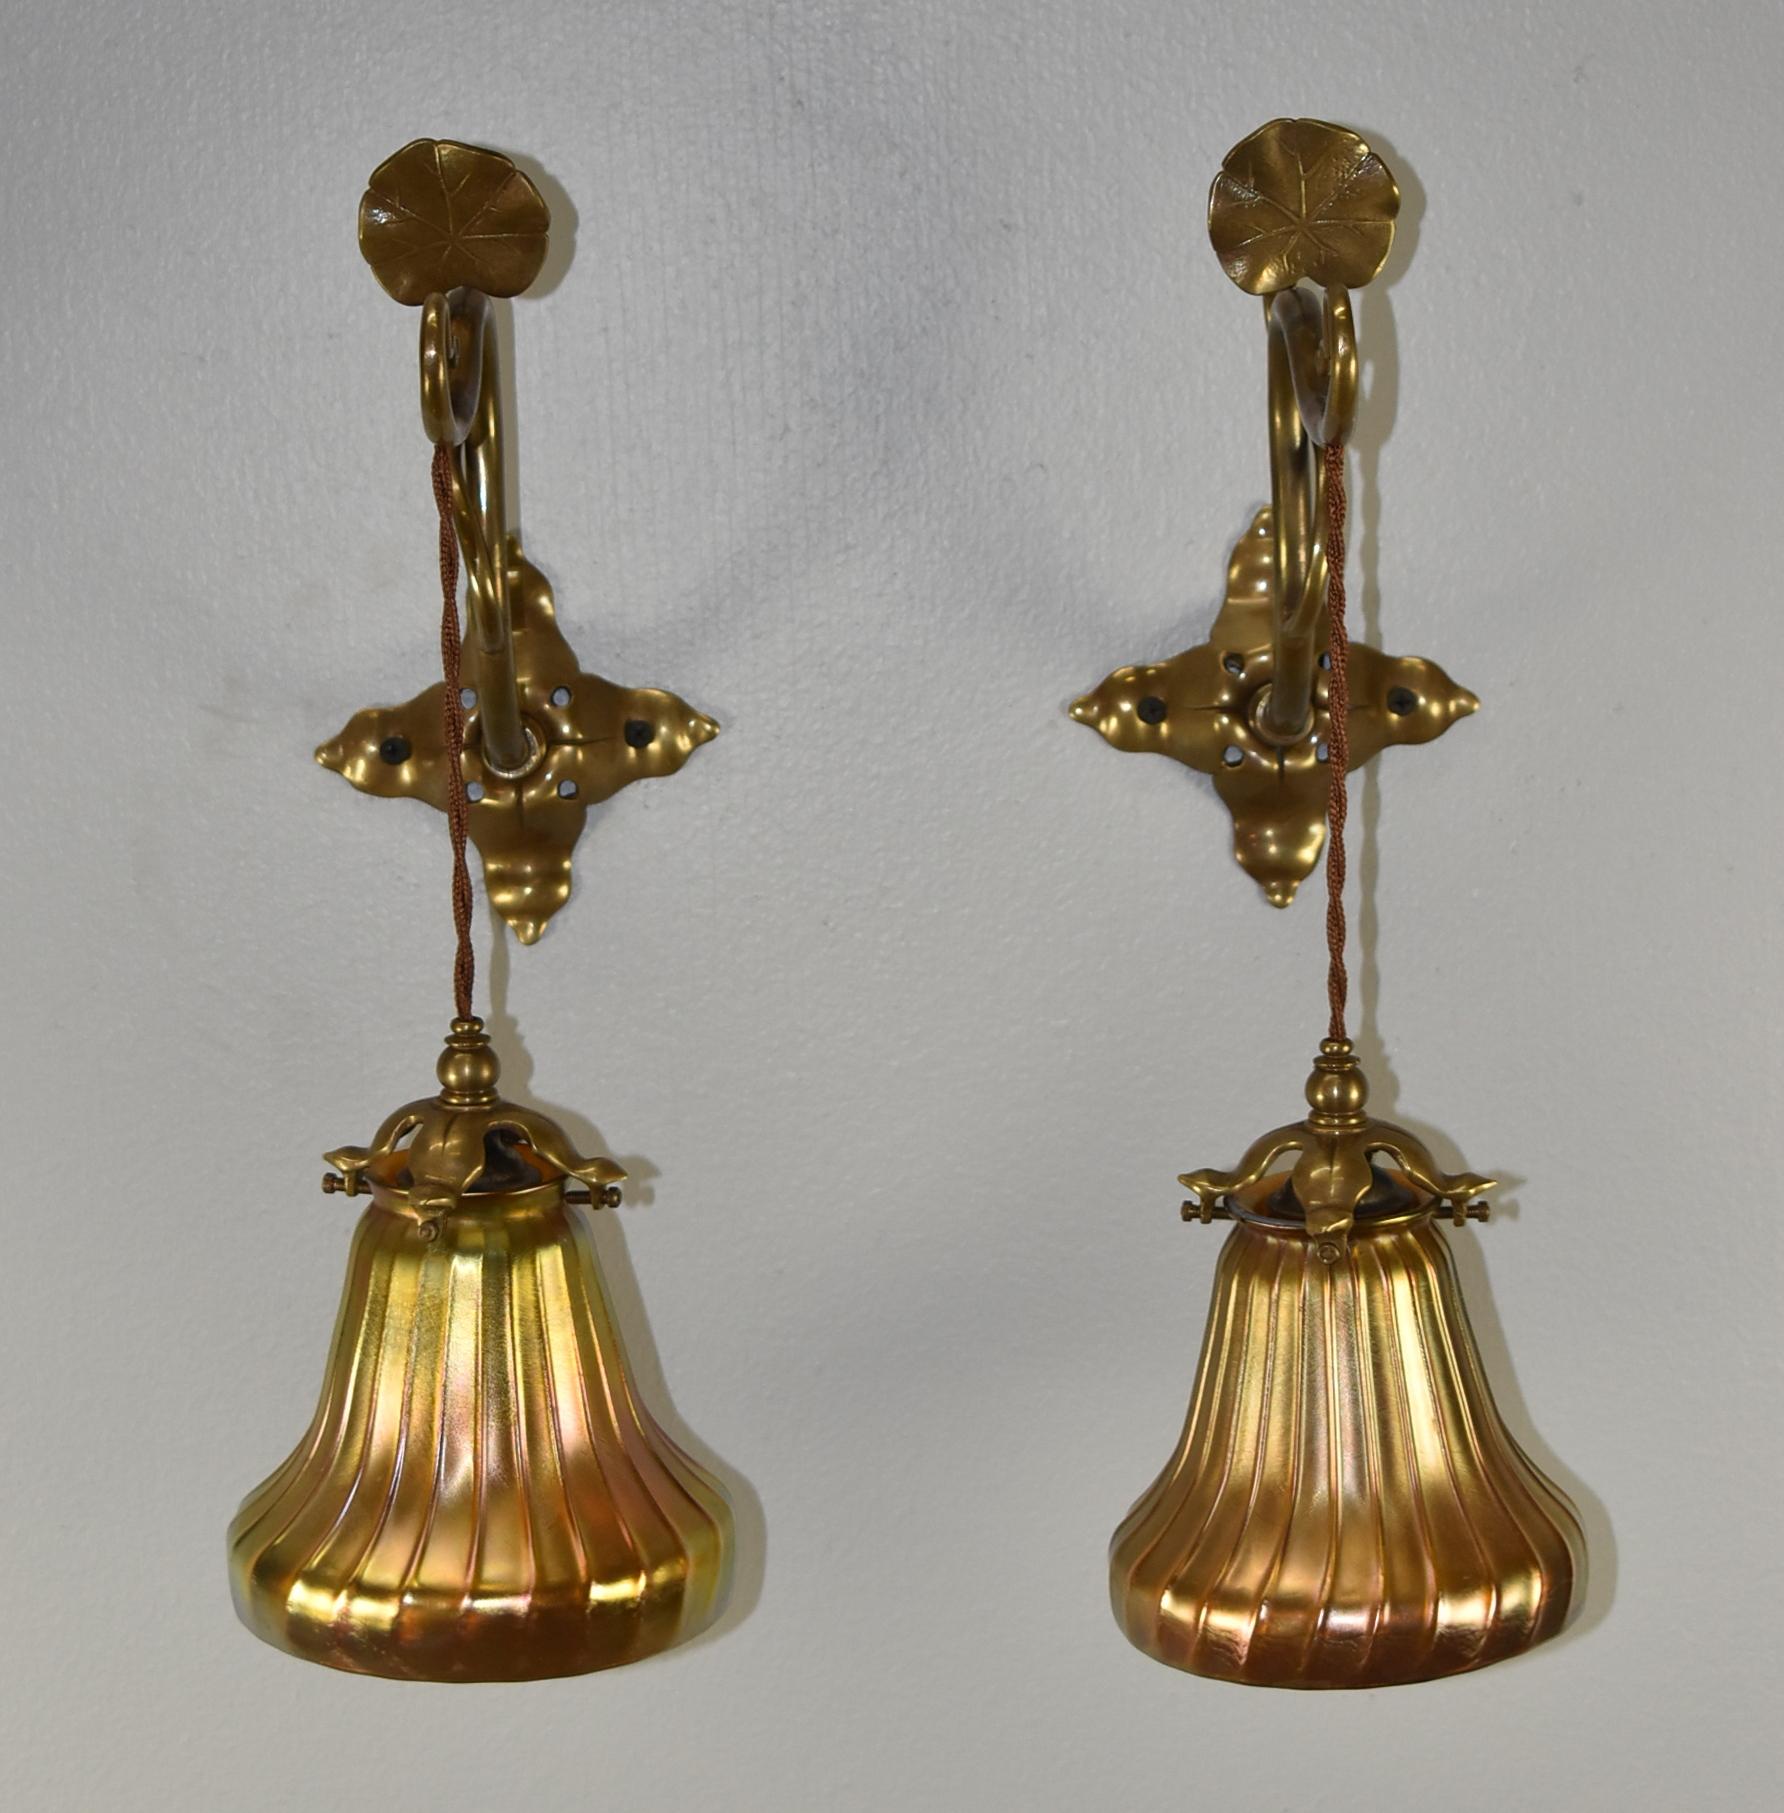 Pair bronze Art Nouveau style wall sconces with lily pad detail. Ribbed gold aurene art glass shades that measure 4.5 tall x 5